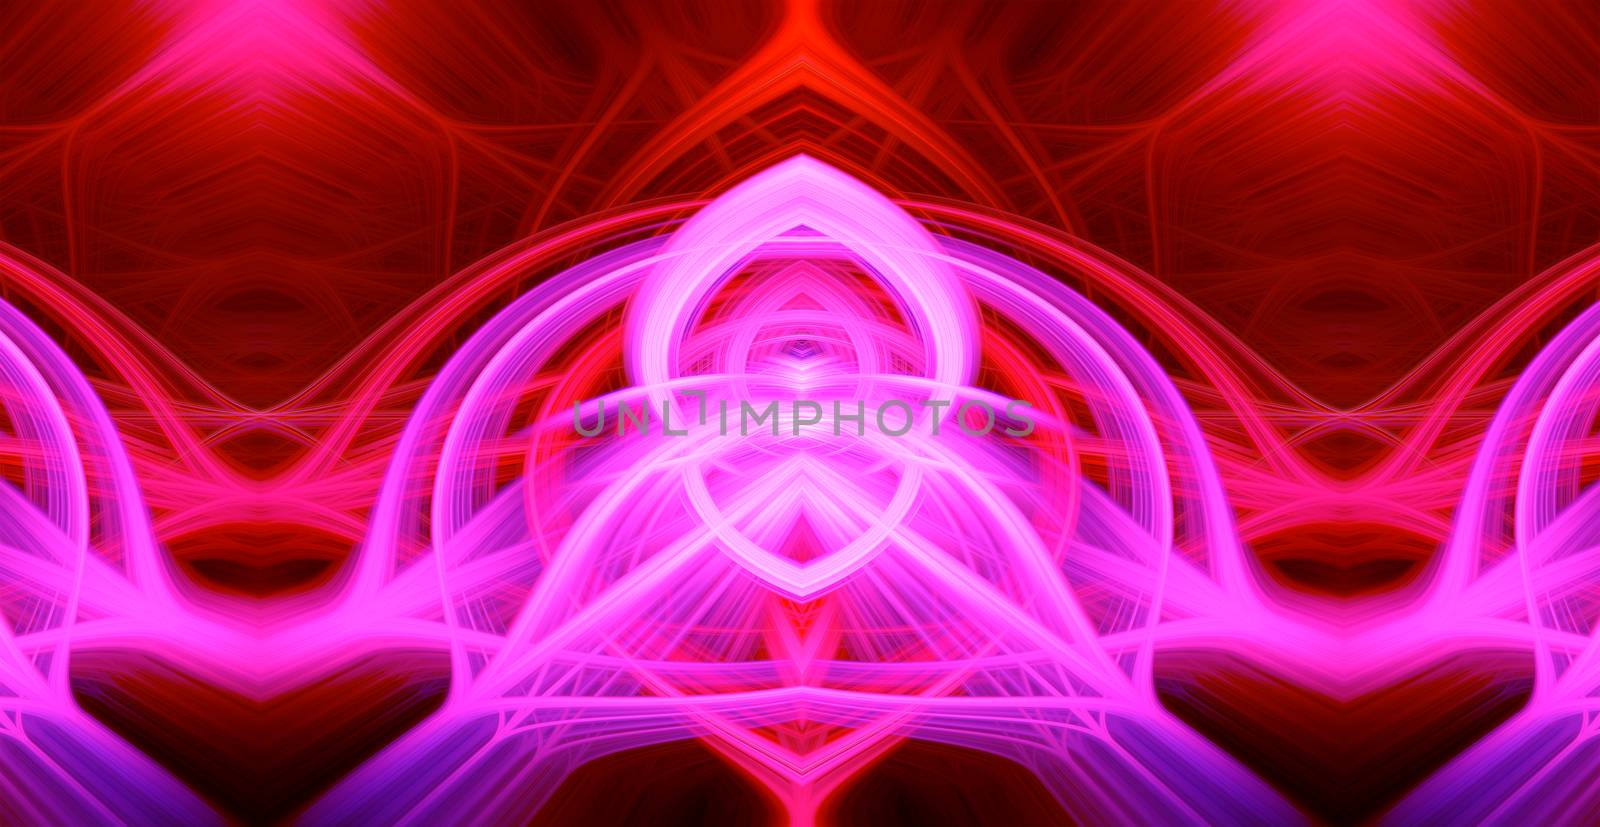 Beautiful abstract intertwined glowing 3d fibers forming a shape of pointy domes, sparkle, flame, flower, interlinked hearts. Purple, maroon, pink, and red colors. Illustration by DamantisZ